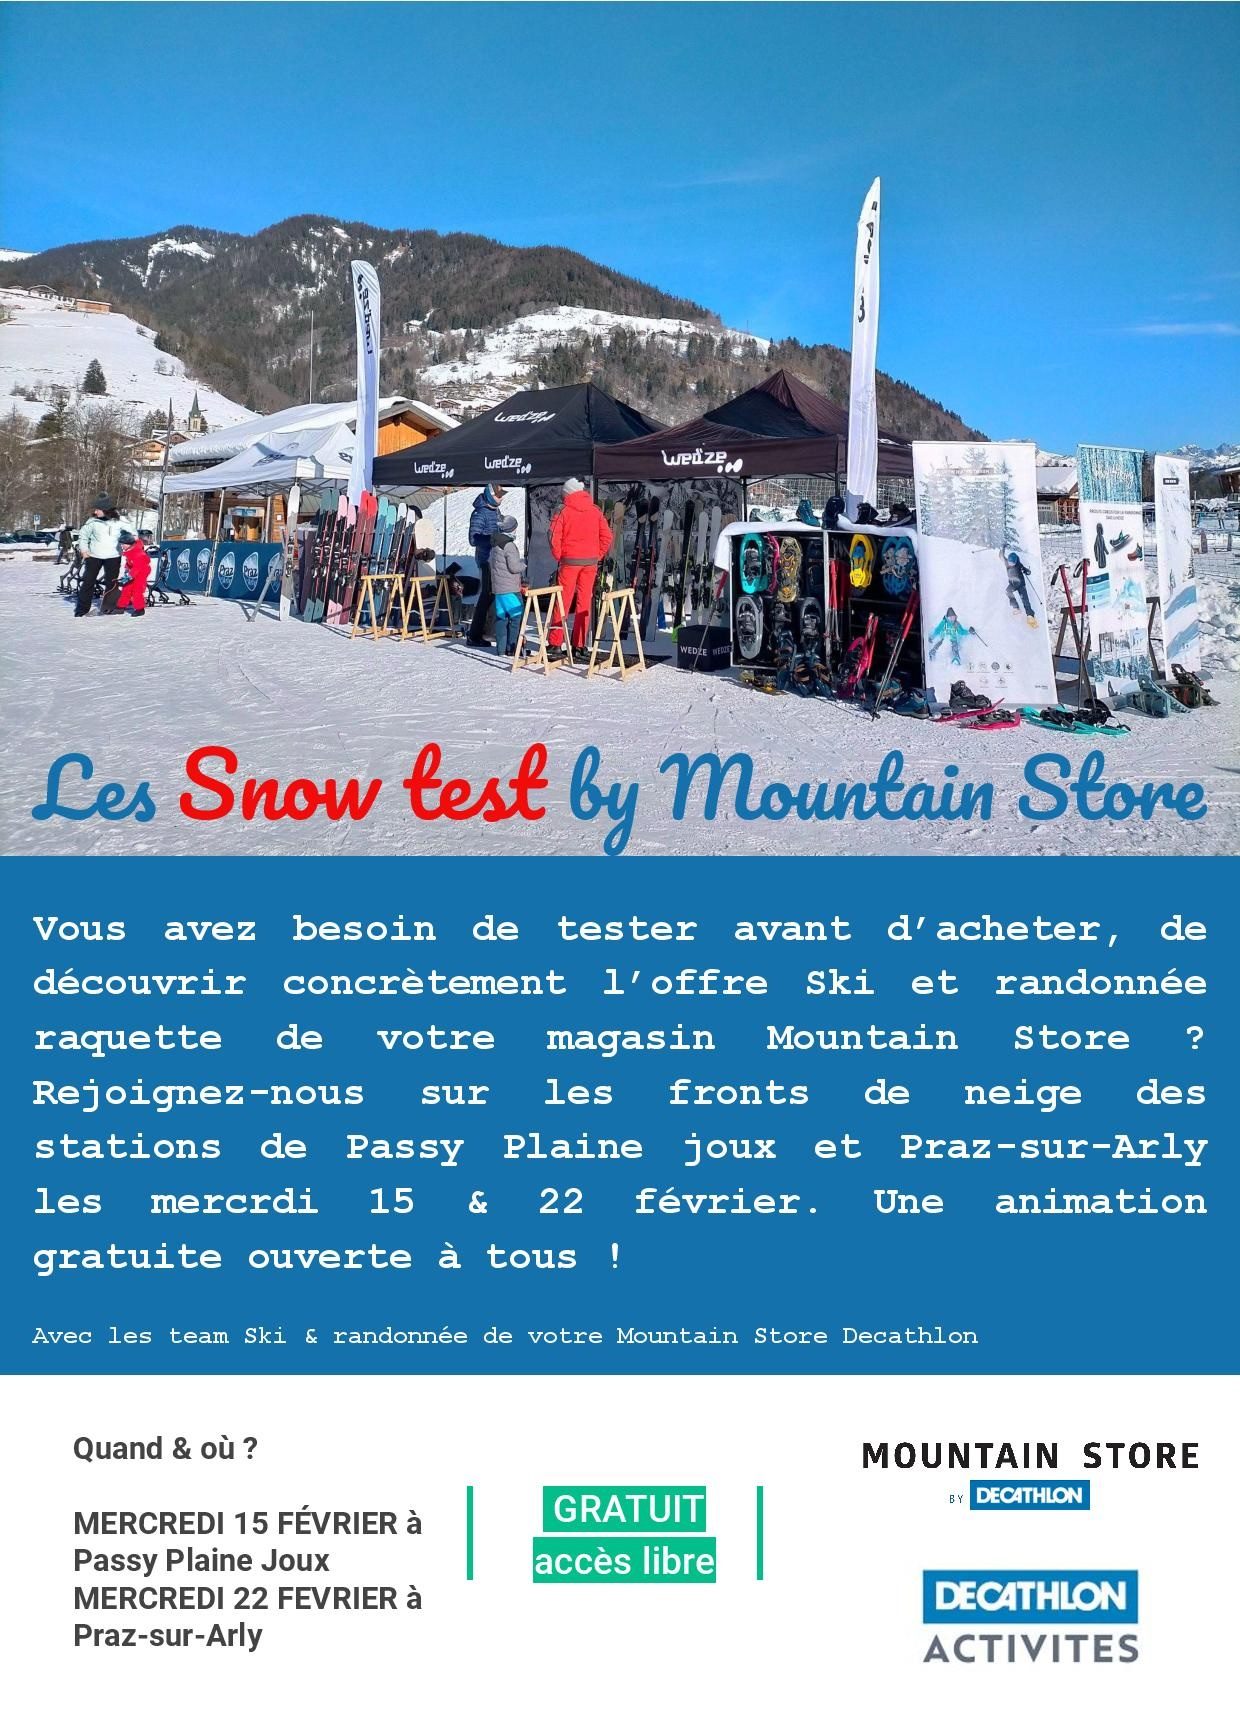 Les snow test by Mountain Store